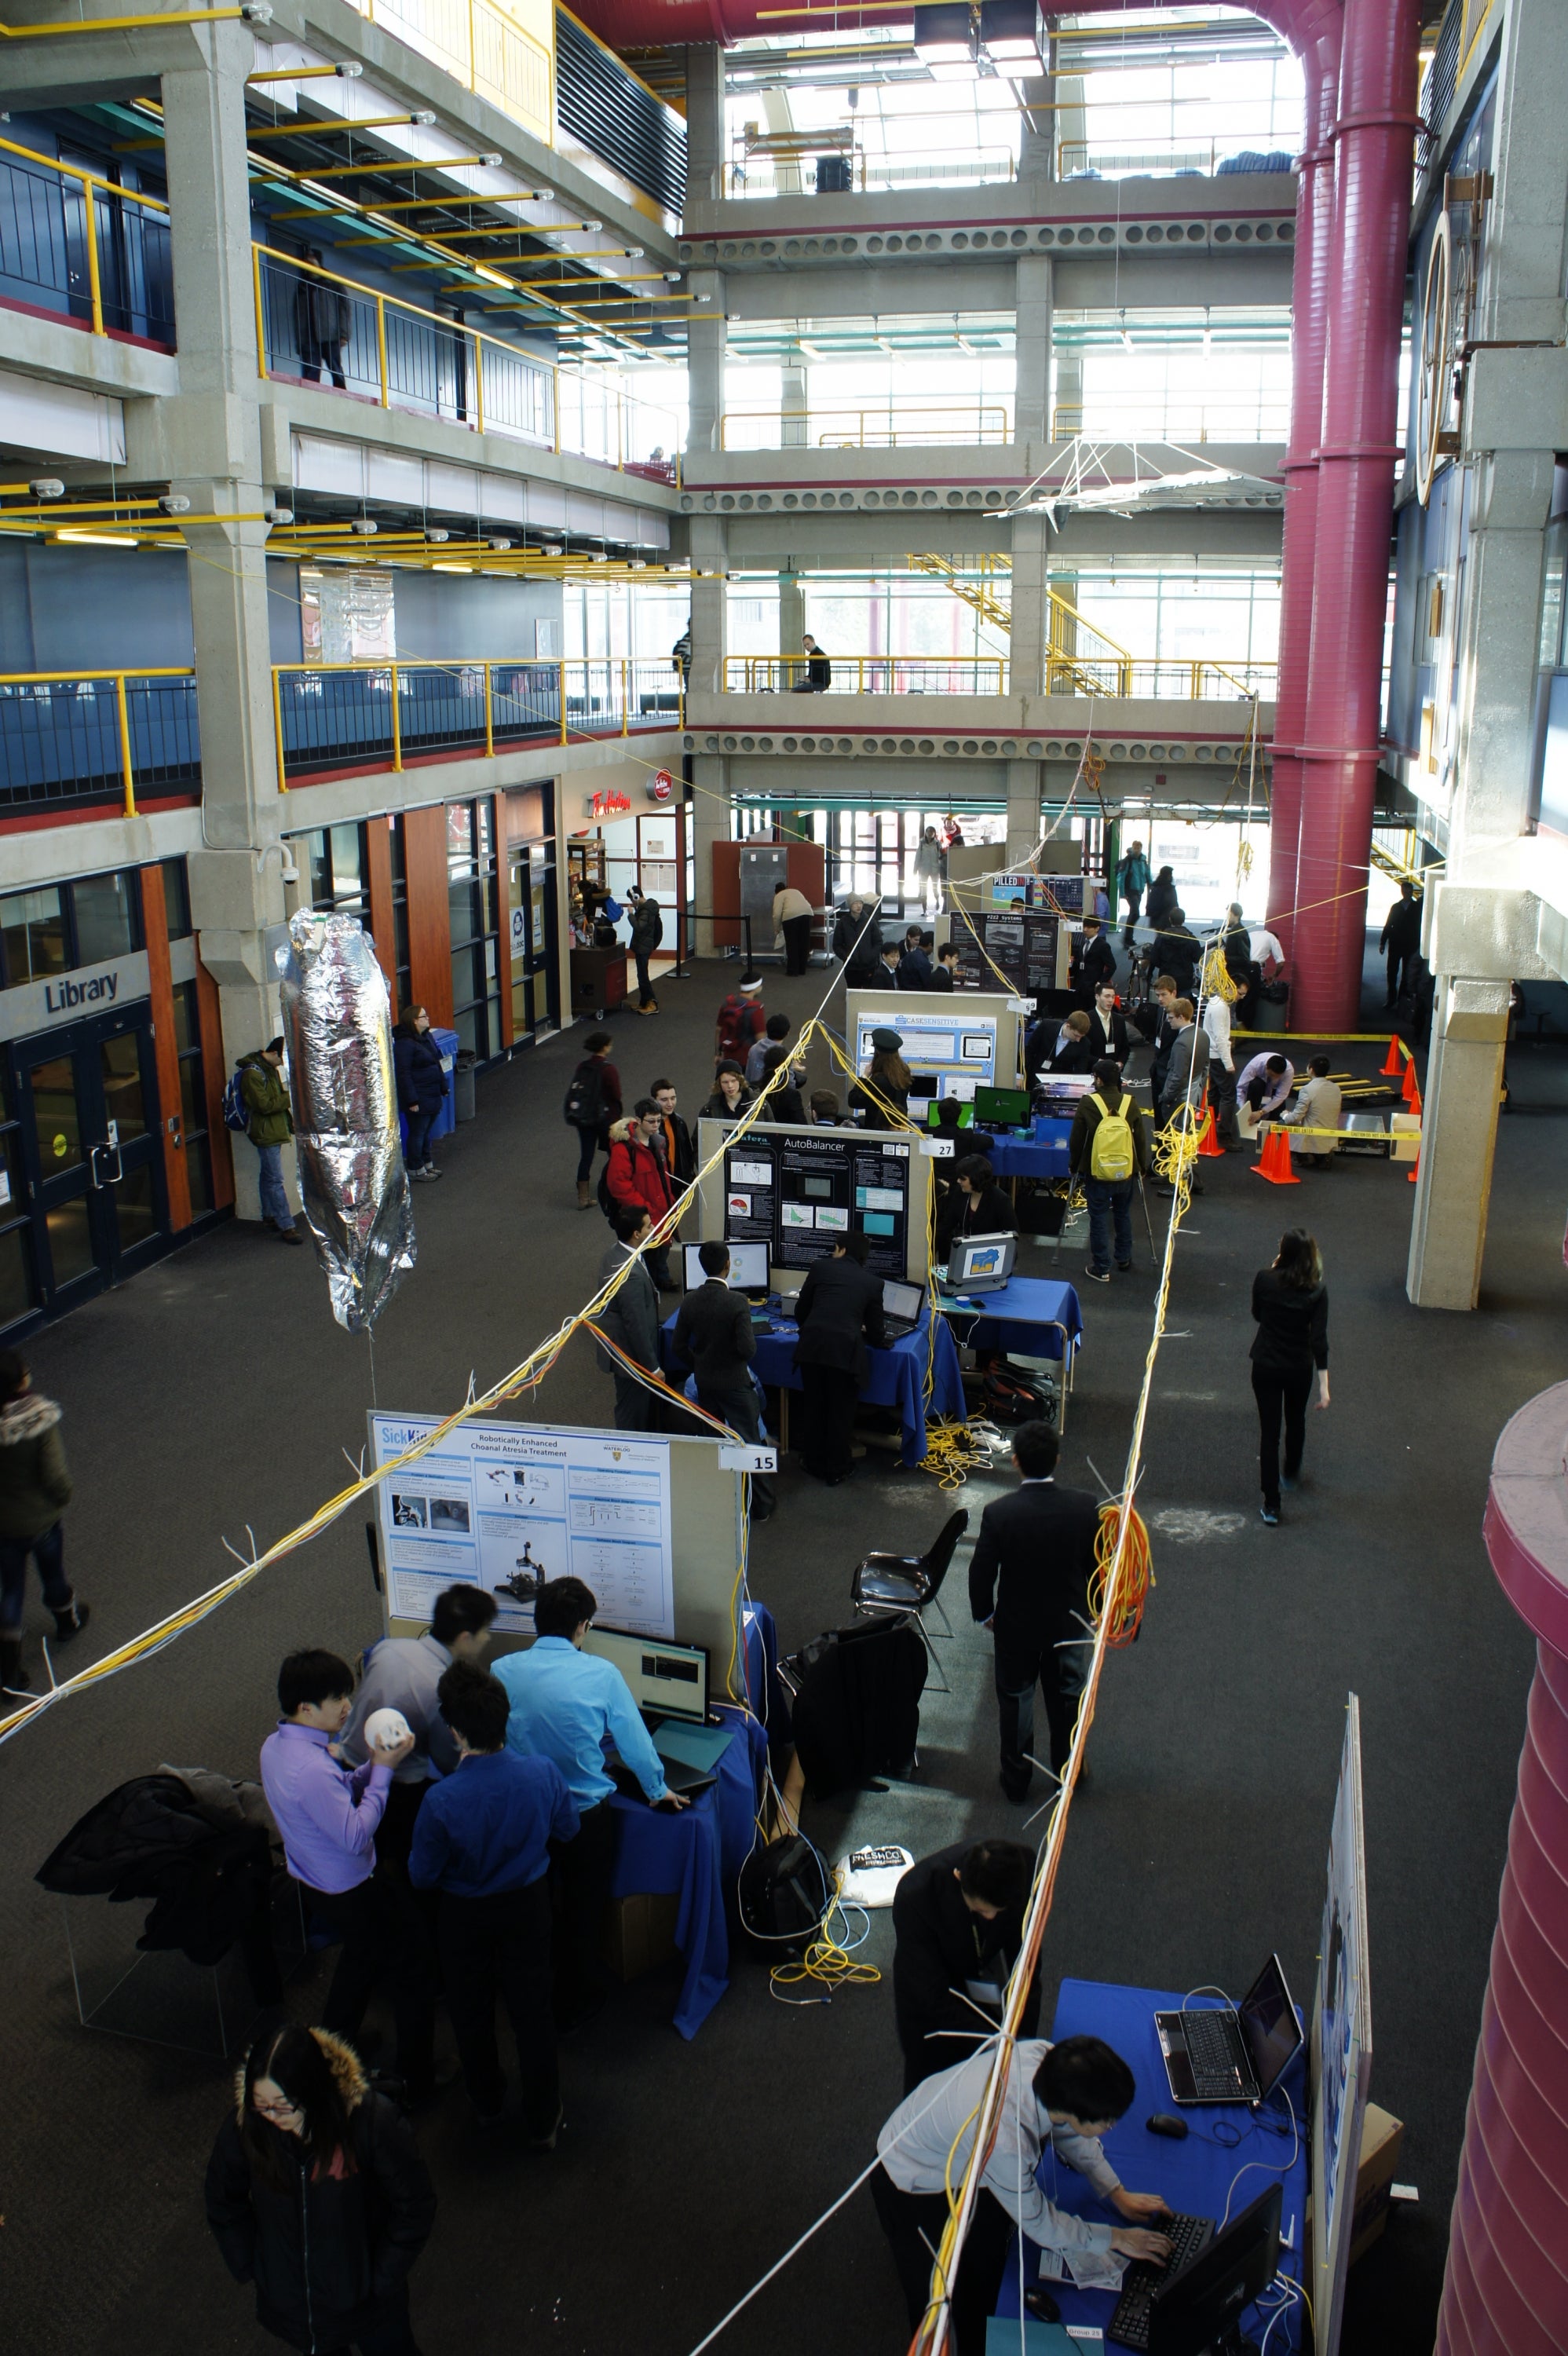 Overhead view of the 2014 Mechatronics Design Symposium in the DC building, University of Waterloo image 1